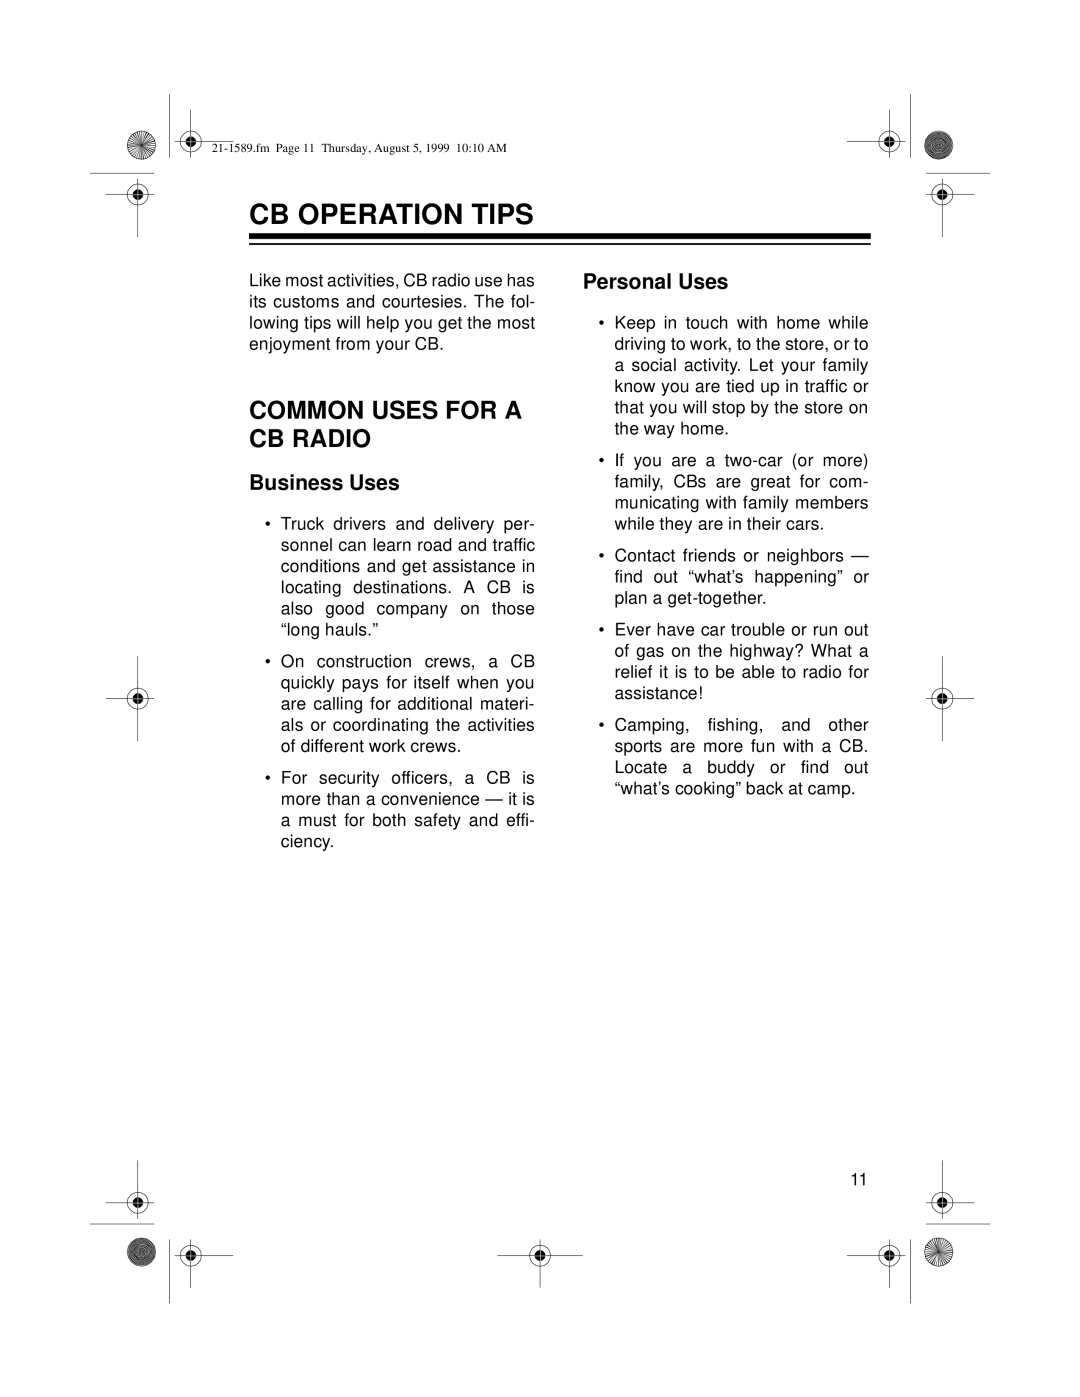 Radio Shack TRC-494 owner manual Cb Operation Tips, Common Uses For A Cb Radio, Business Uses, Personal Uses 